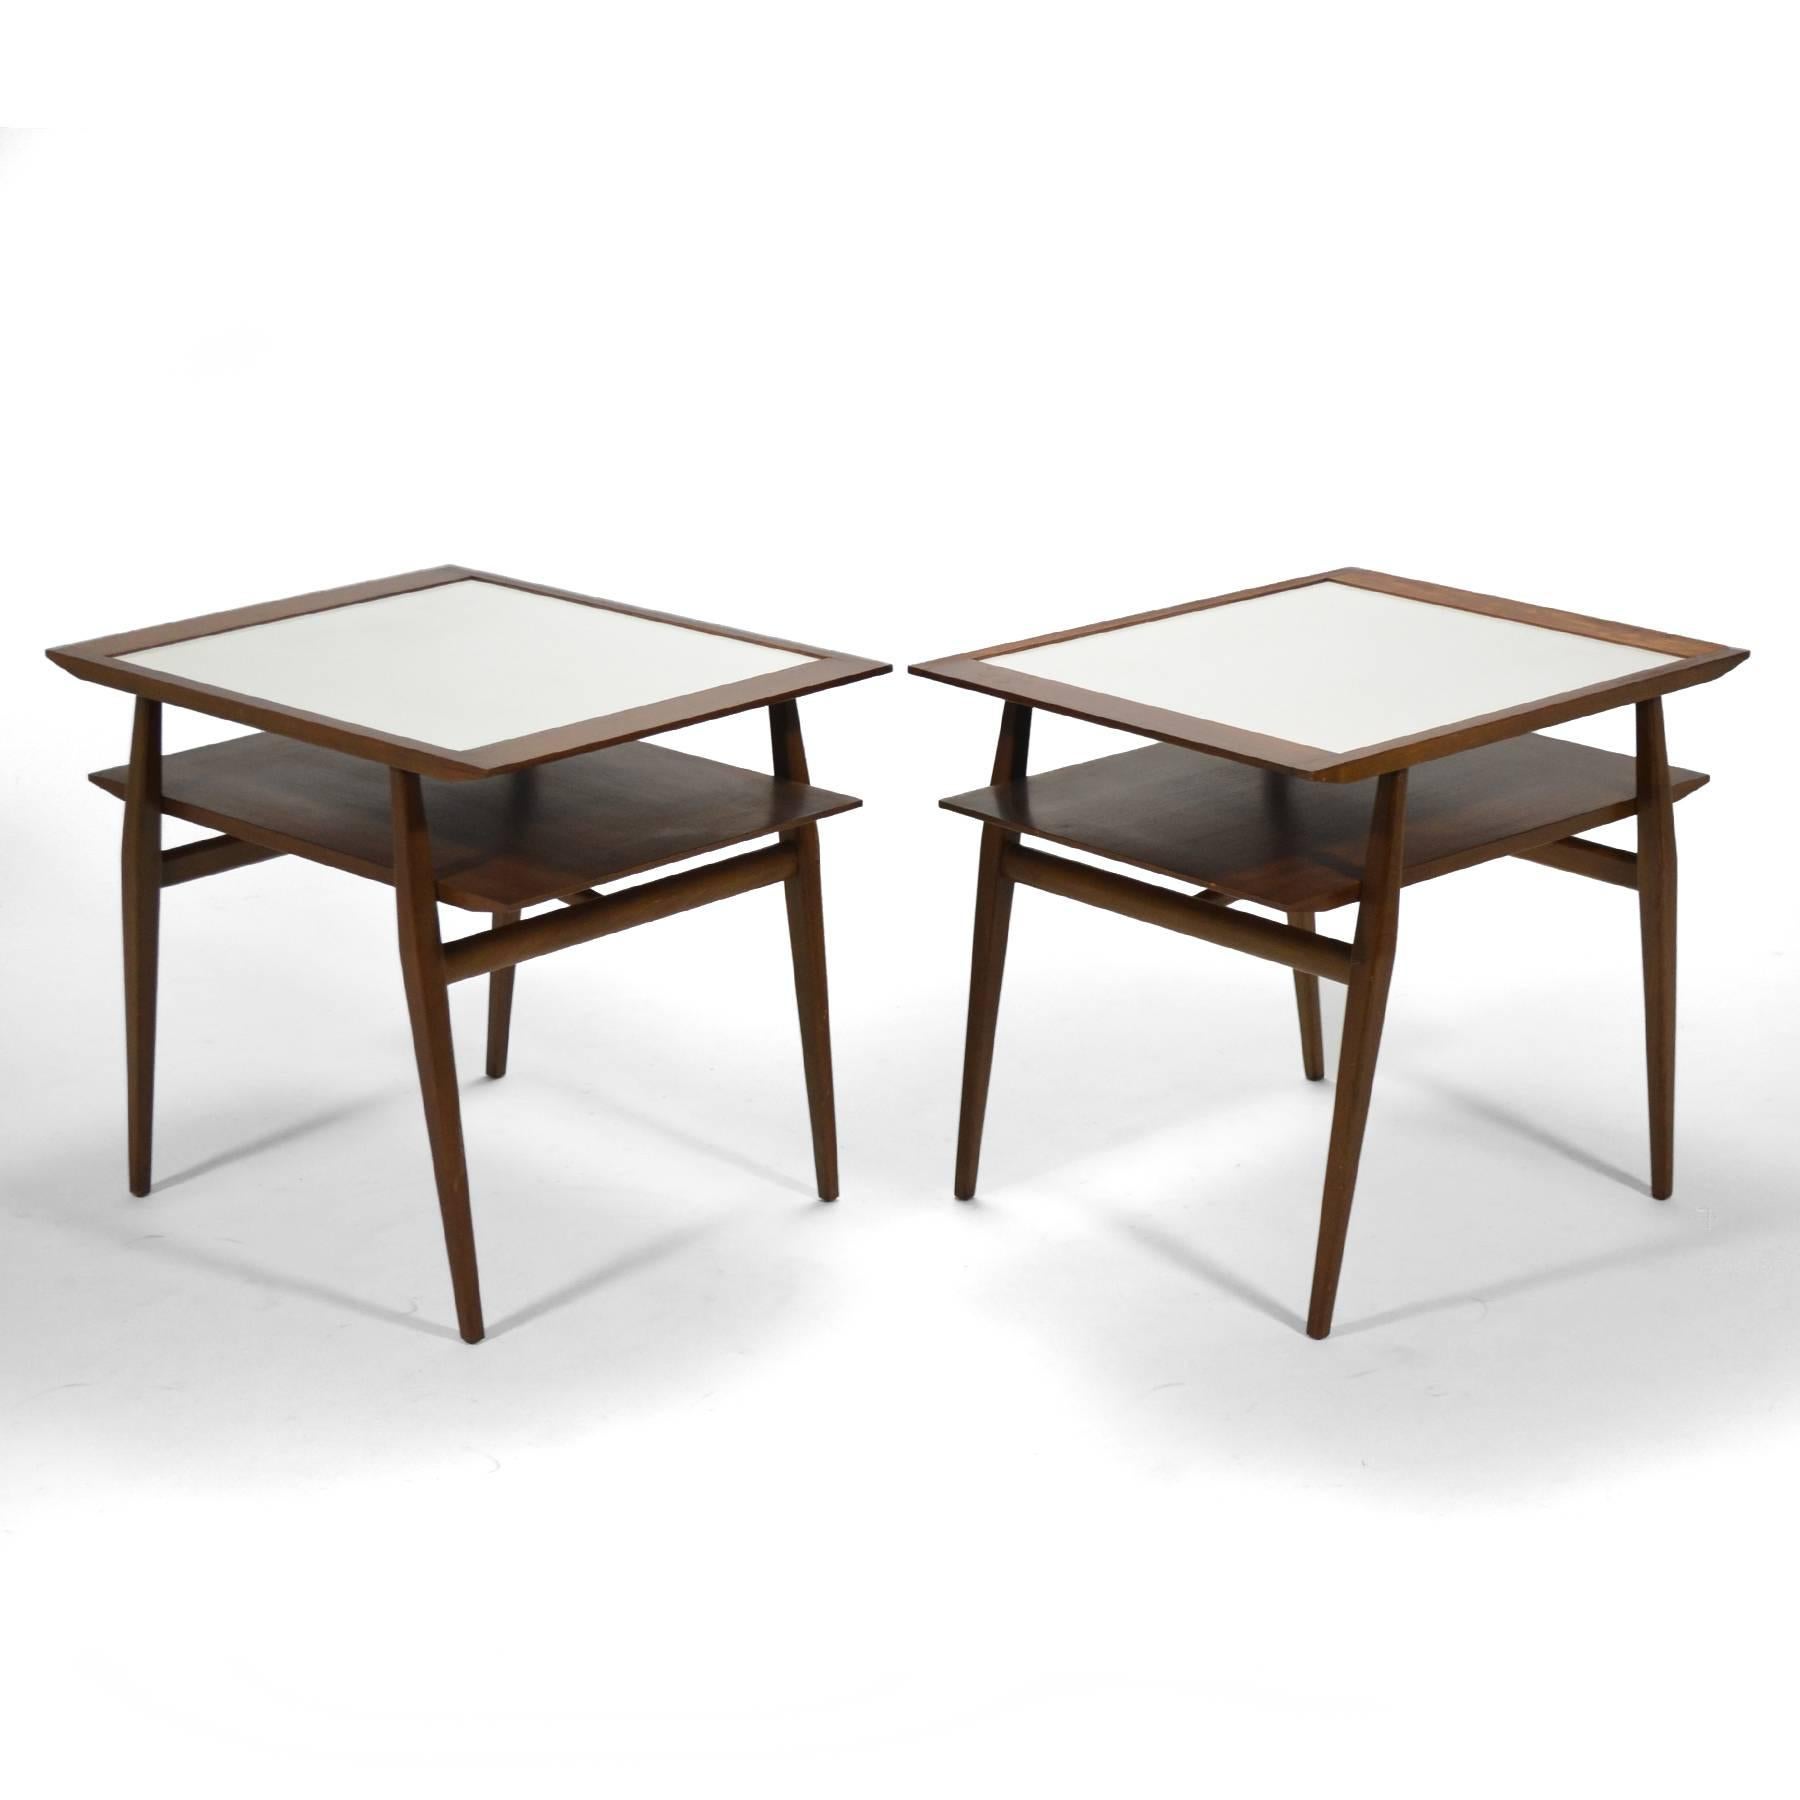 This handsome pair of Bertha Schaefer two tiered end tables in walnut have inset mica tops and dramatic angular lines. The design was designated model no. 2132 in the Singer and Sons catalog.